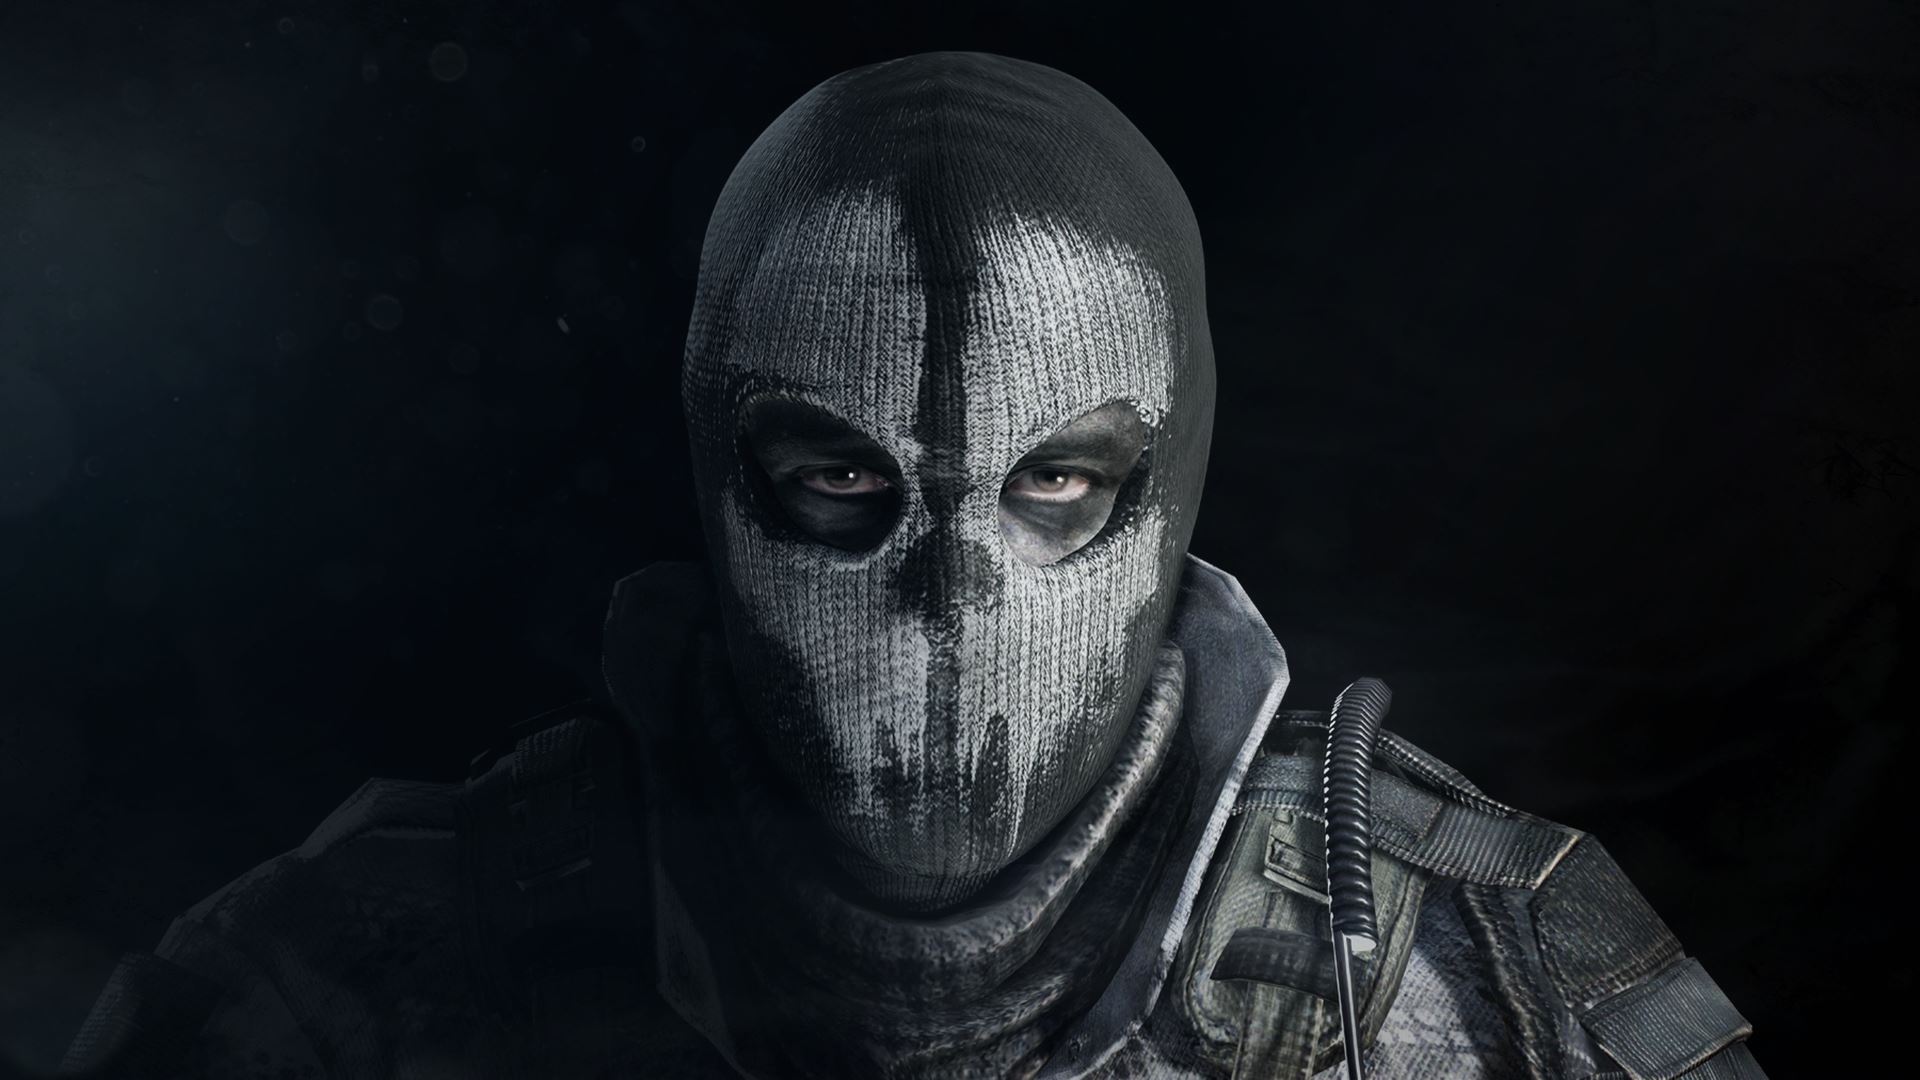 GHOSTS - How to get the New Ghost Mask (Call of Duty Ghosts Player